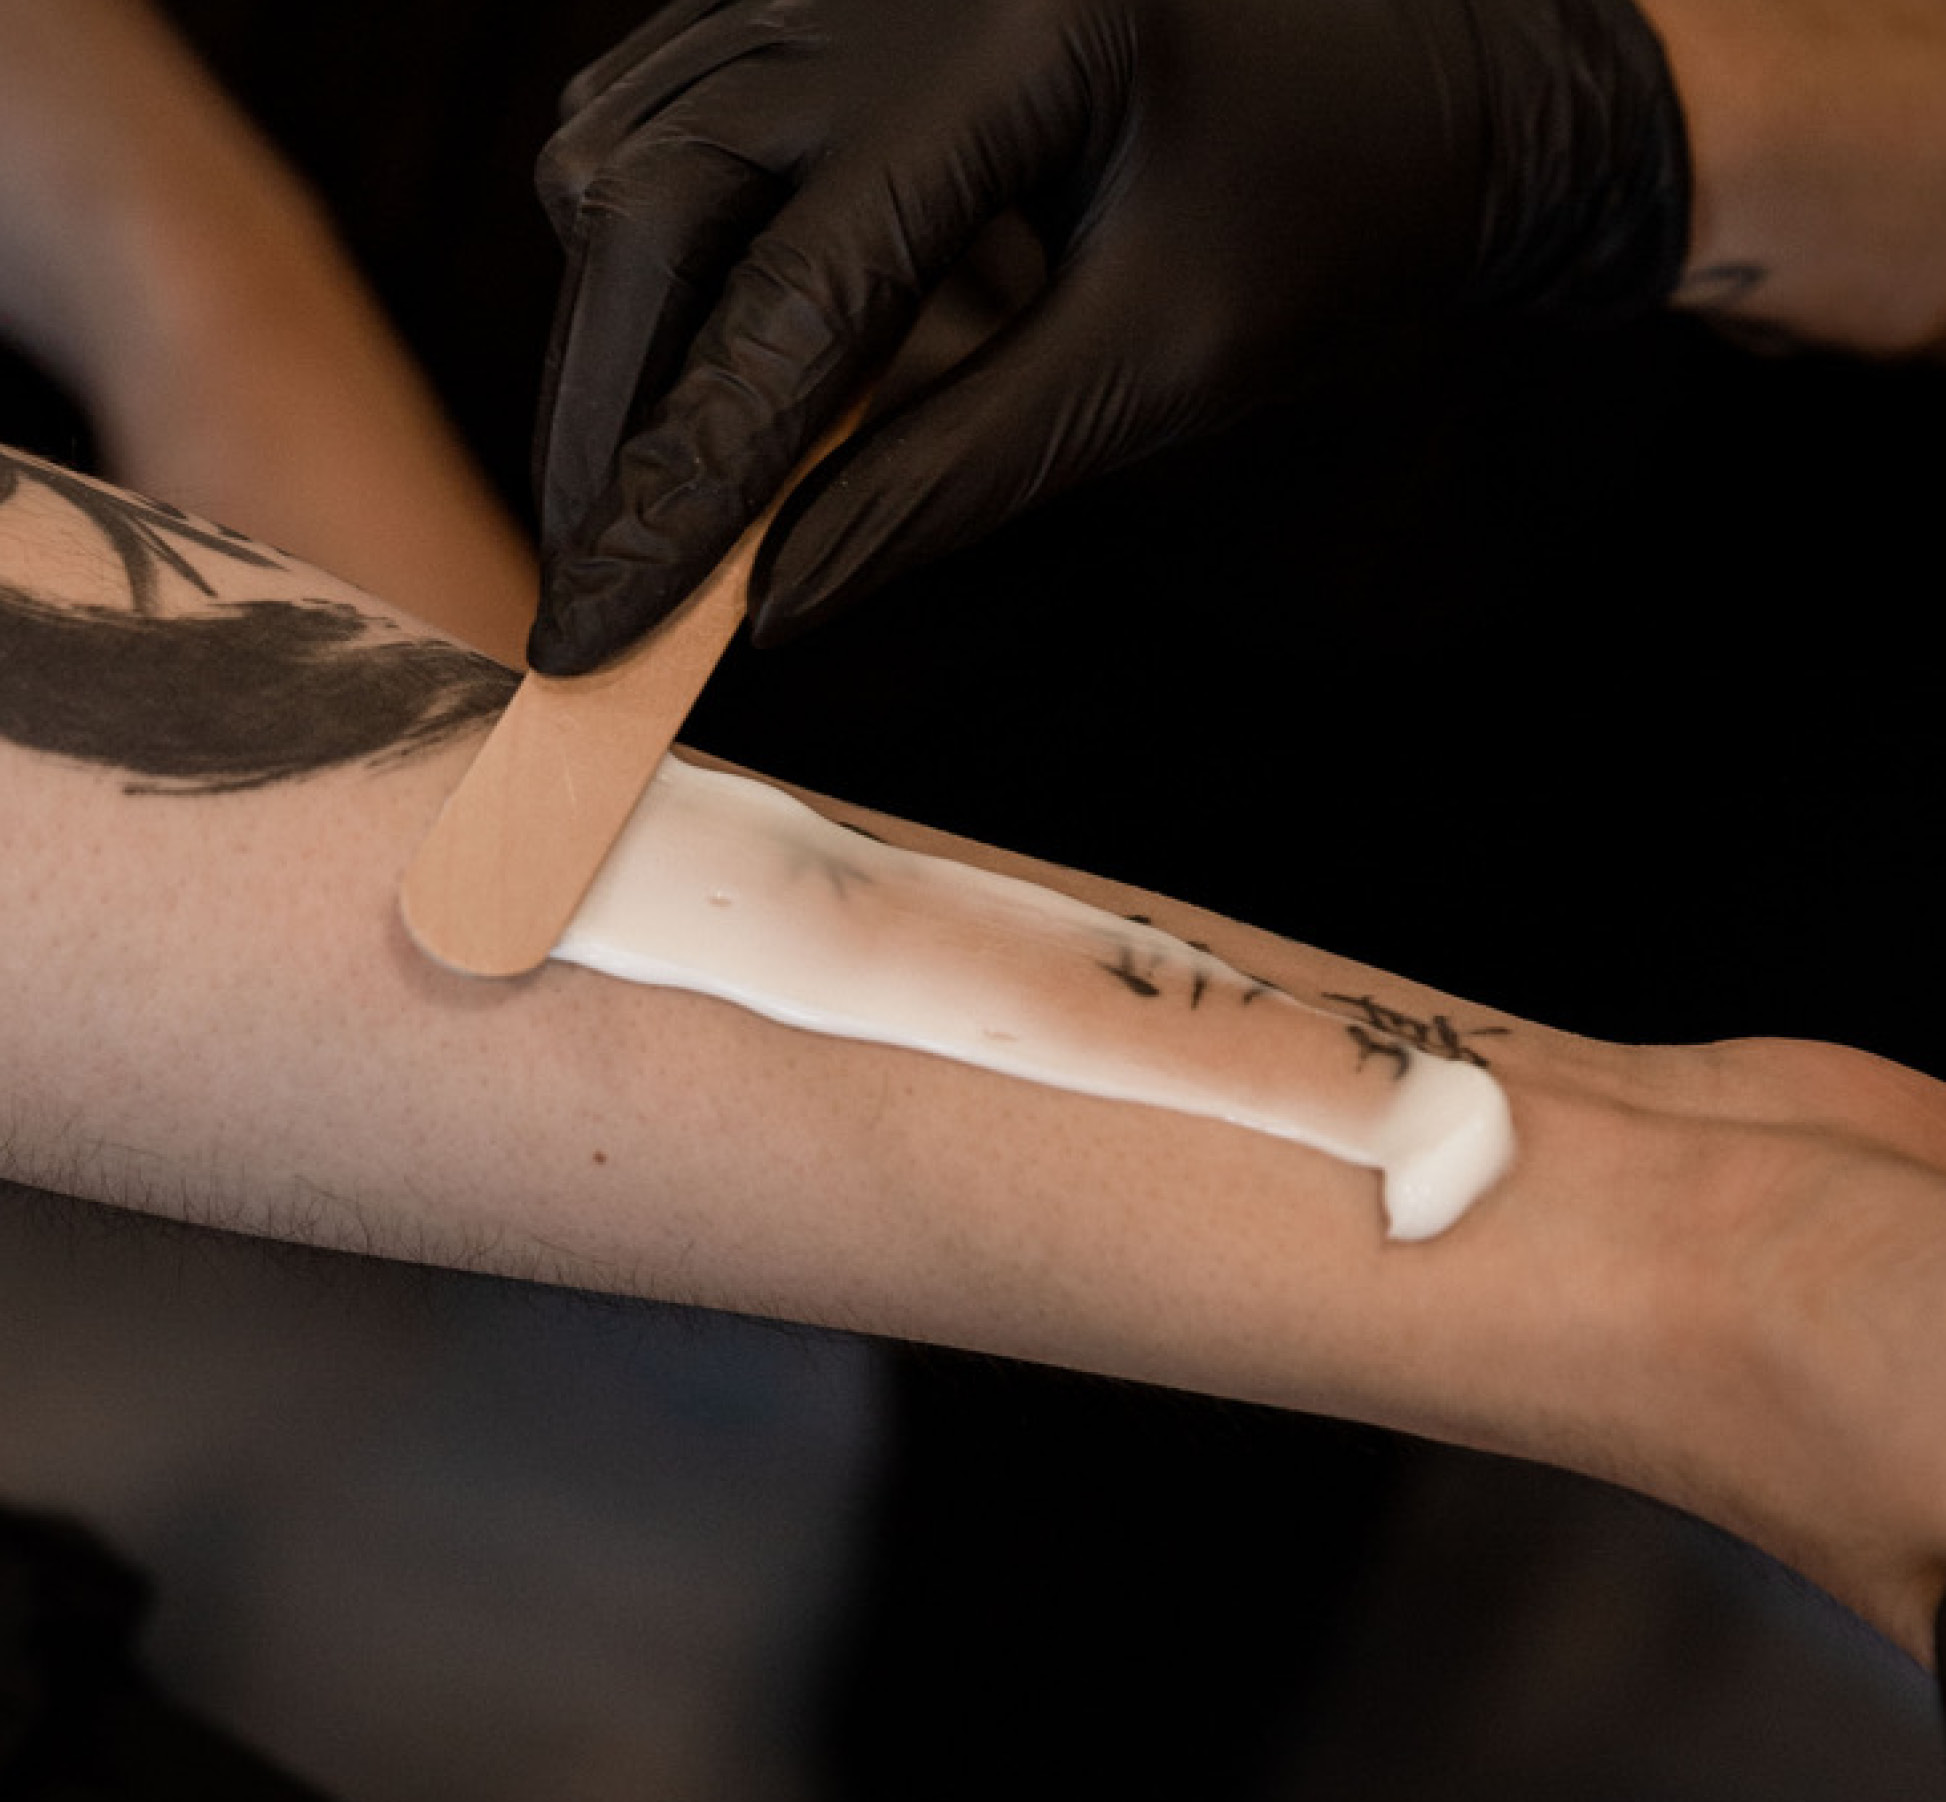 15 Best Lotions for Healing a Tattoo in 2023